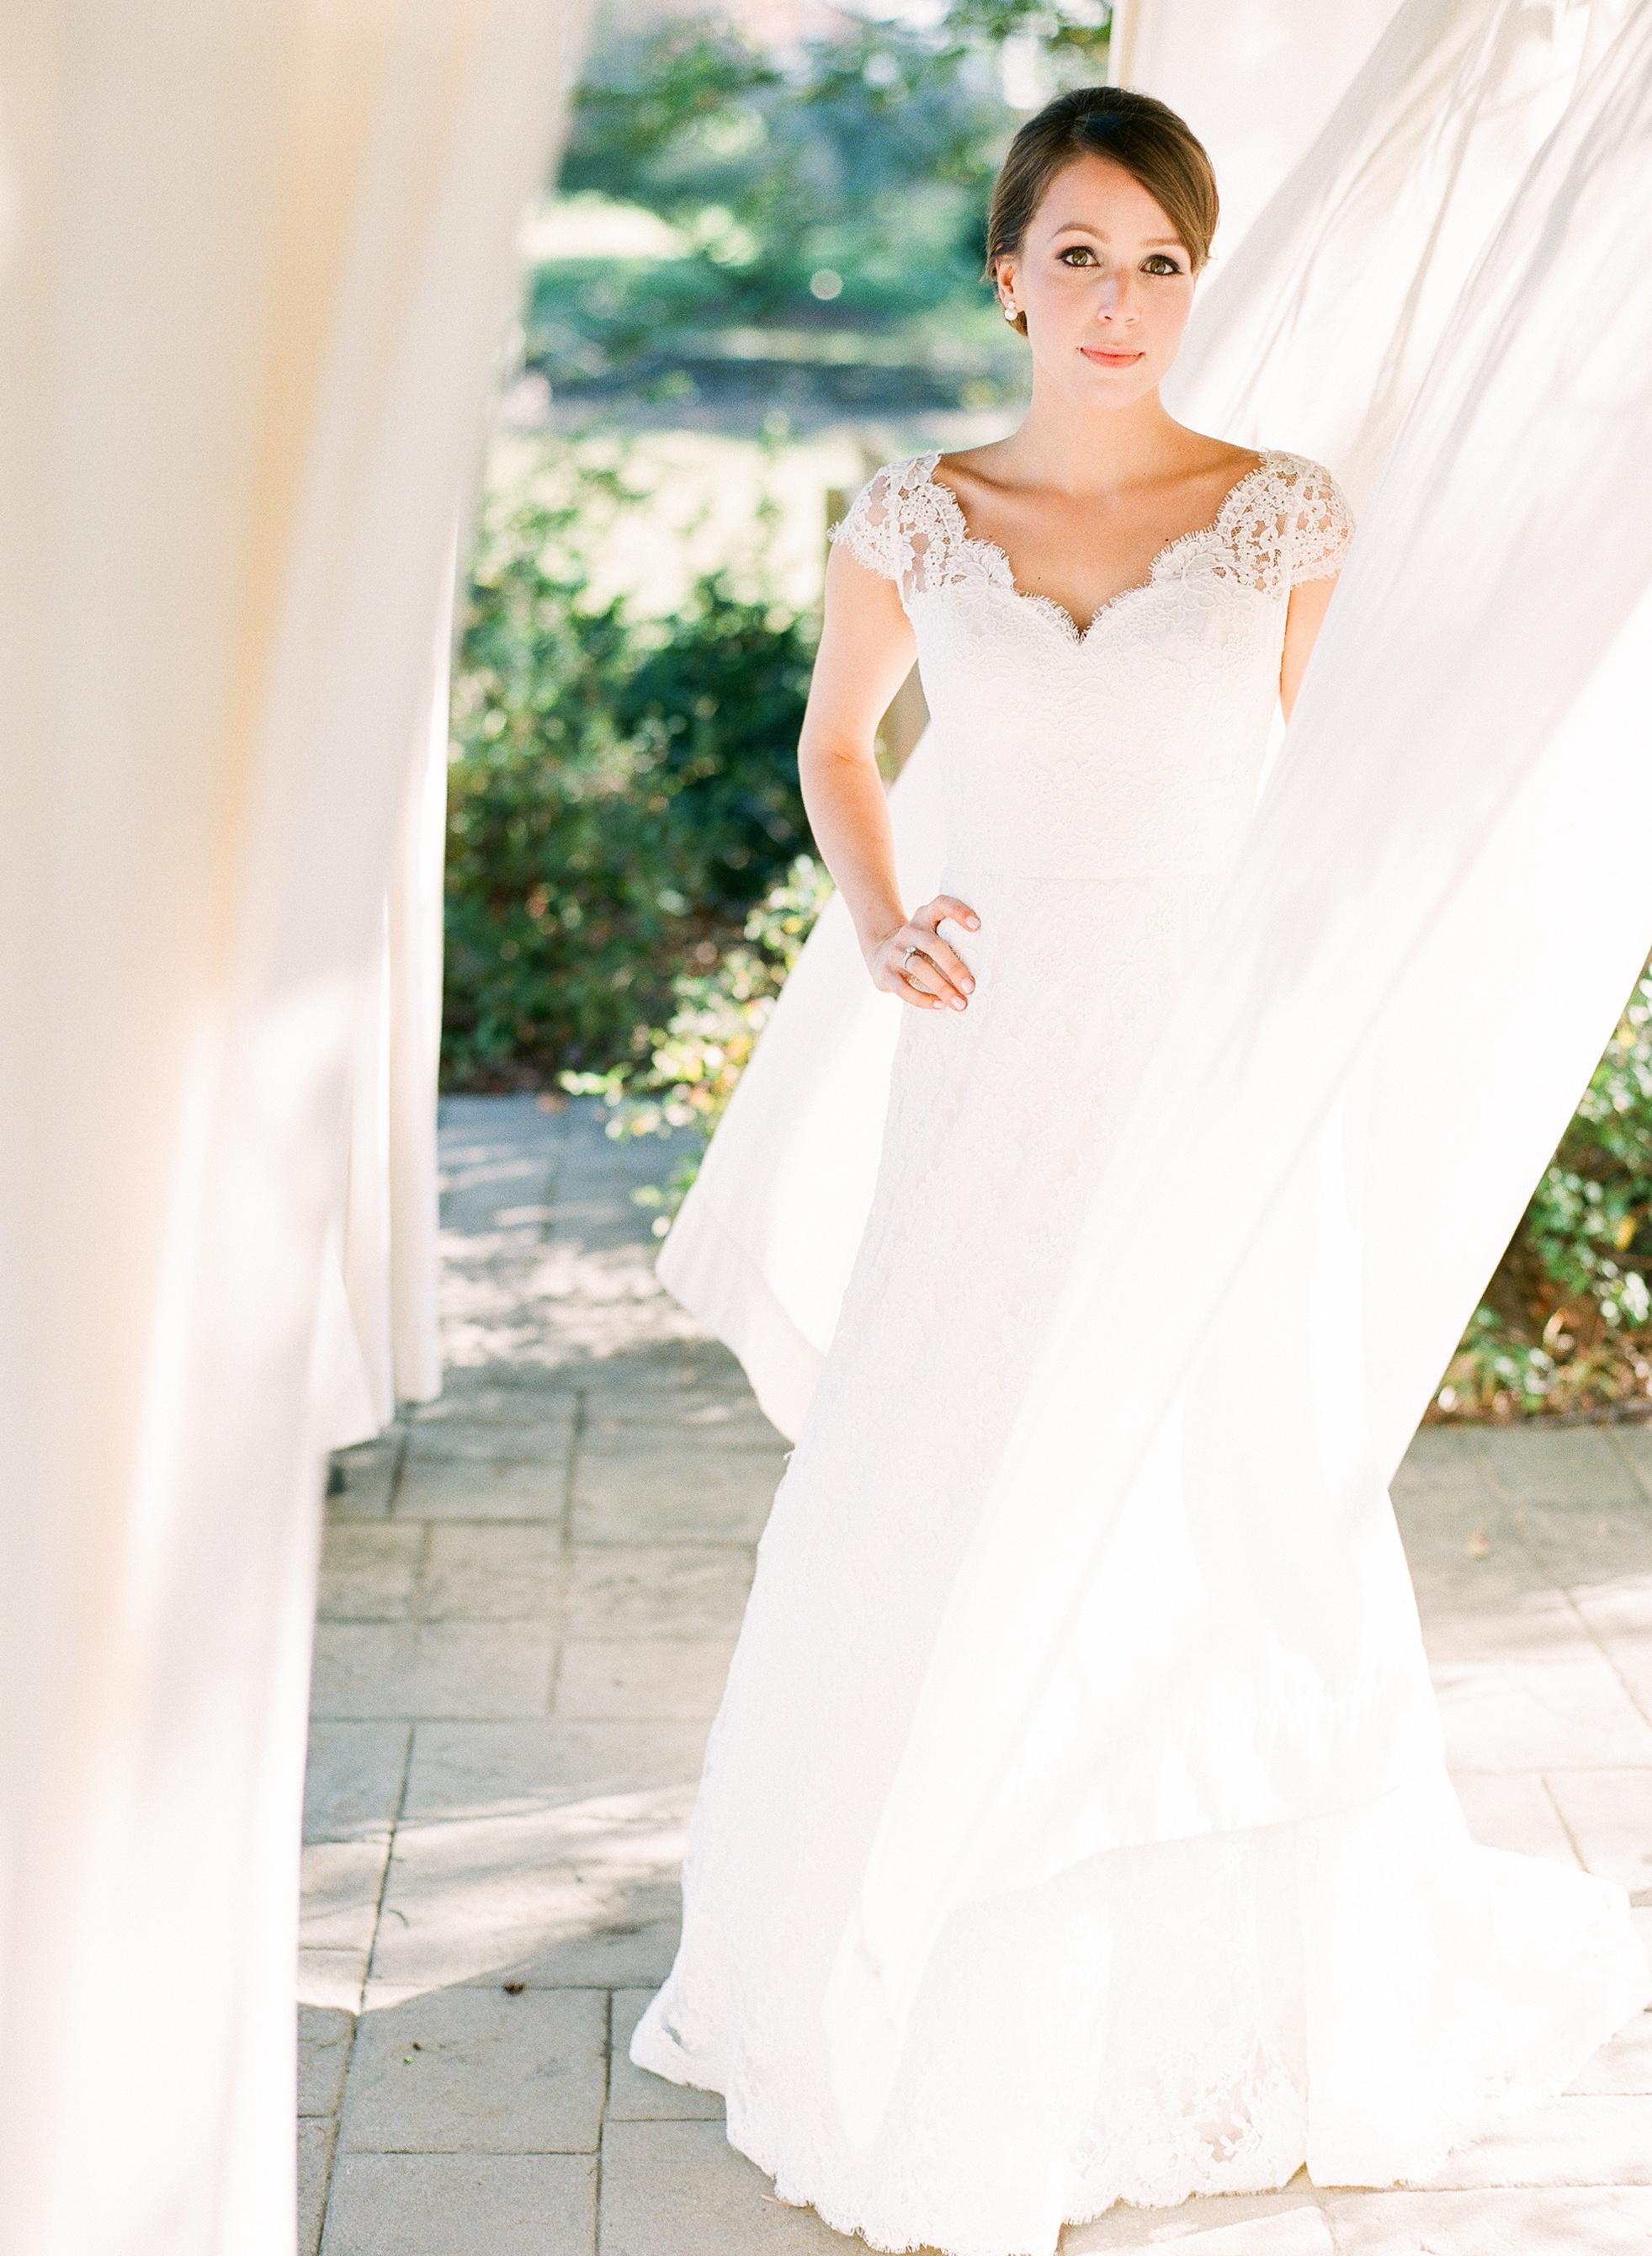 Intimate Southern Wedding Dressed in Neutrals